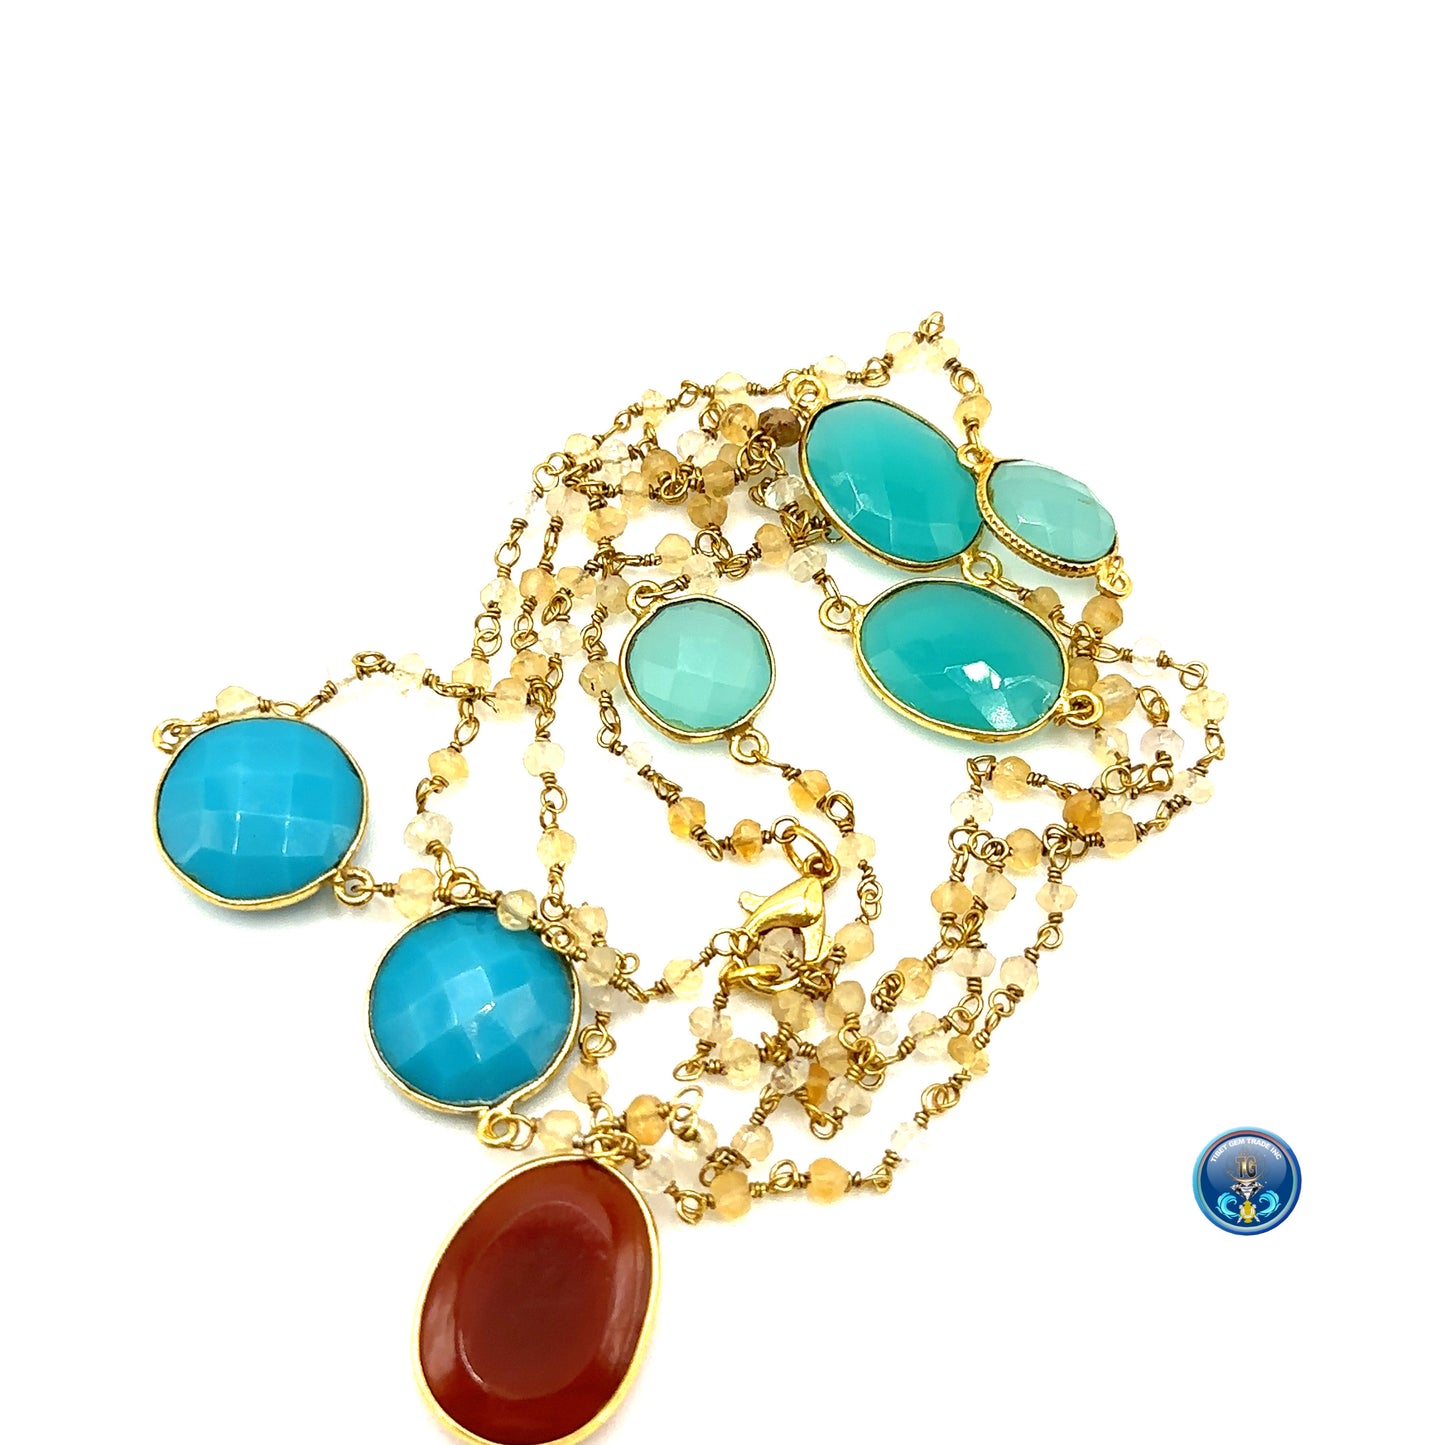 Chalcedony, Turquoise and carnelian with golden rutilated quartz